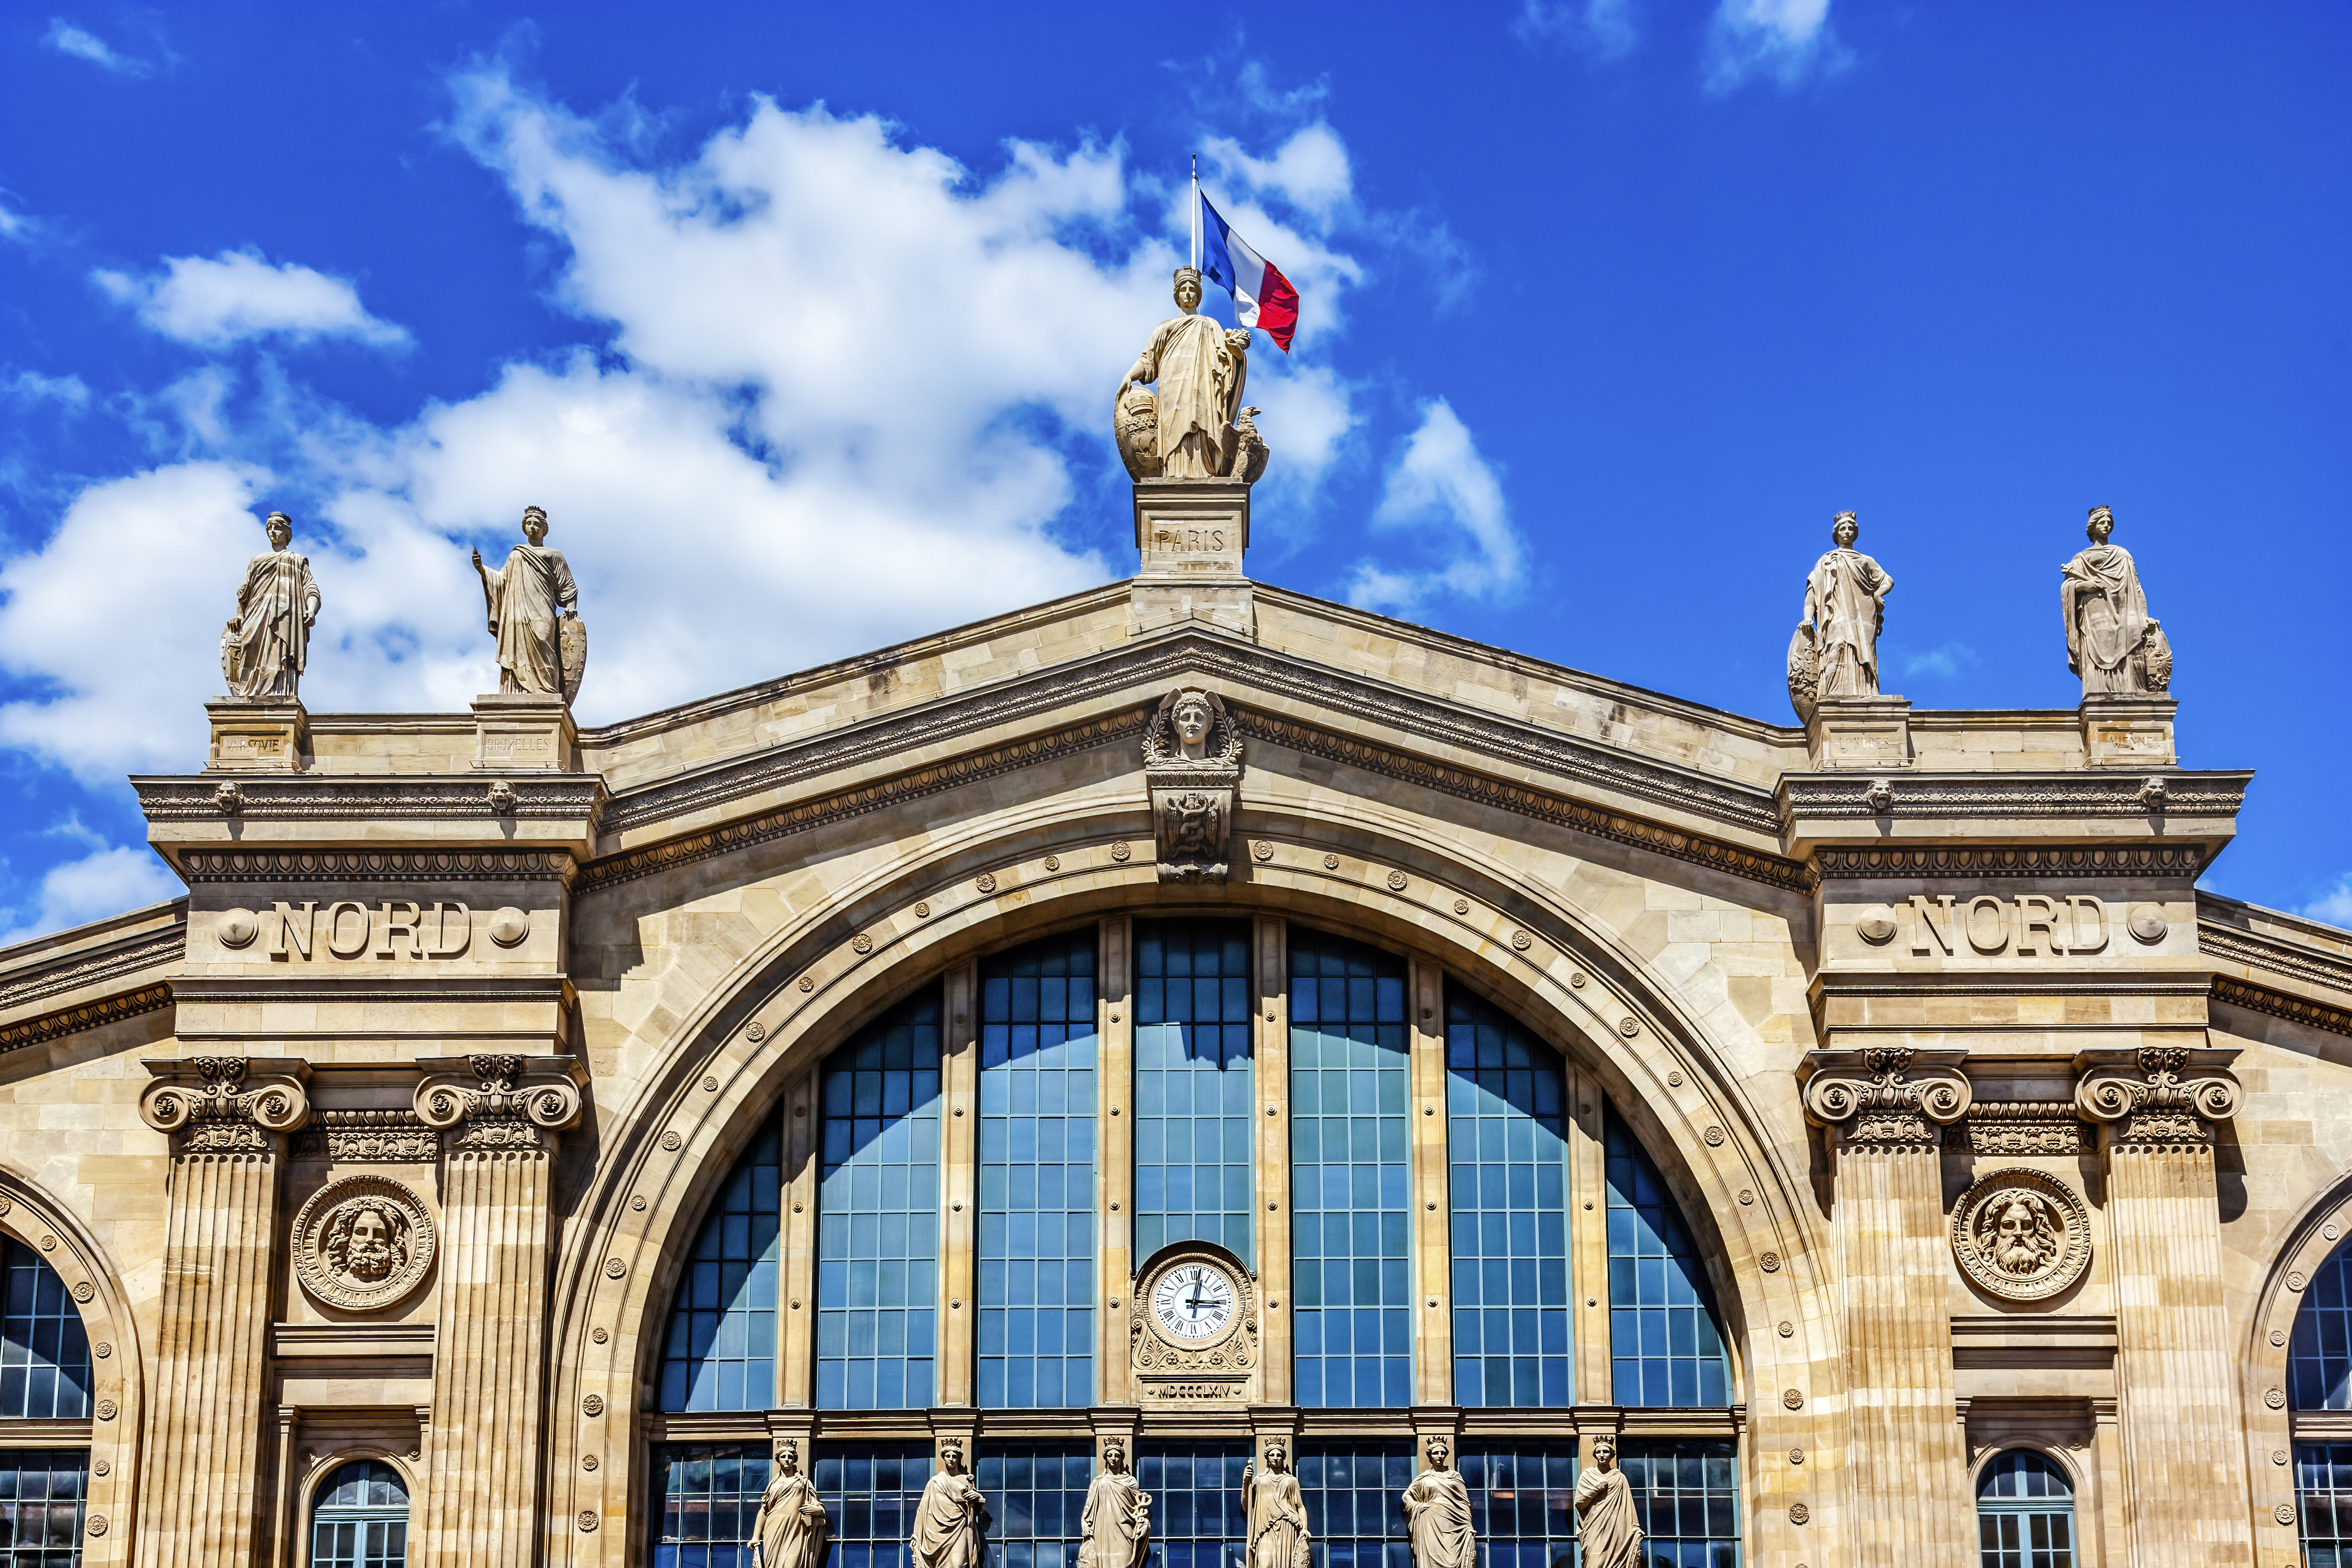 The Eurostar connects the station to the UK, as well as Belgium, Germany and the Netherlands